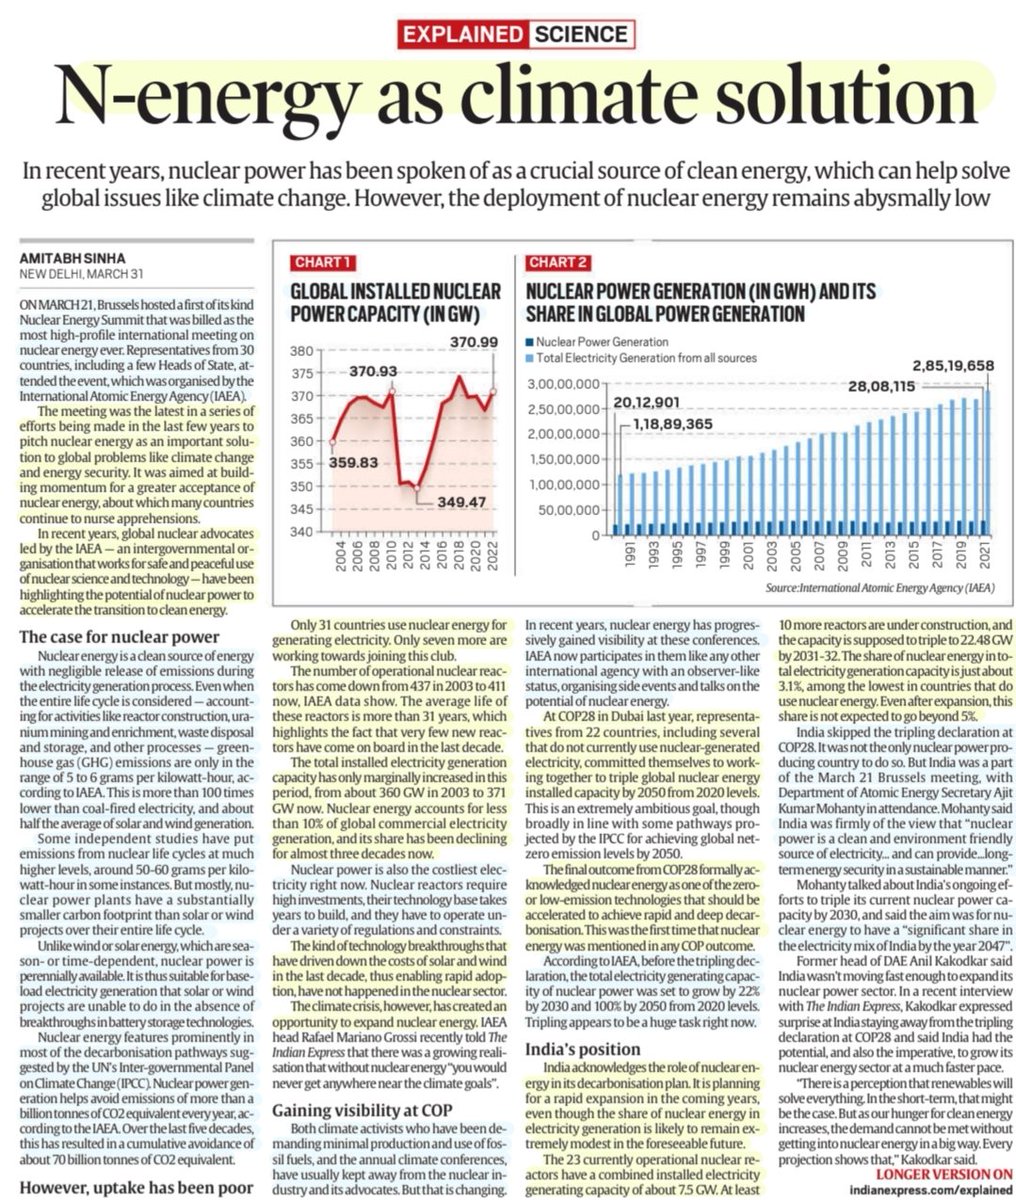 'N-energy as Climate Solution'

:An Insightful article by Sh Amitabh Sinha 

Abt #NuclearEnergy ,installed capacity,generation,benefits,impact,#ClimateChange &
More info..

#Nuclear #energy #CleanEnergy 
#FossilFuels #GlobalWarming
#NuclearEnergySummit
#Science 

#UPSC
Source:IE